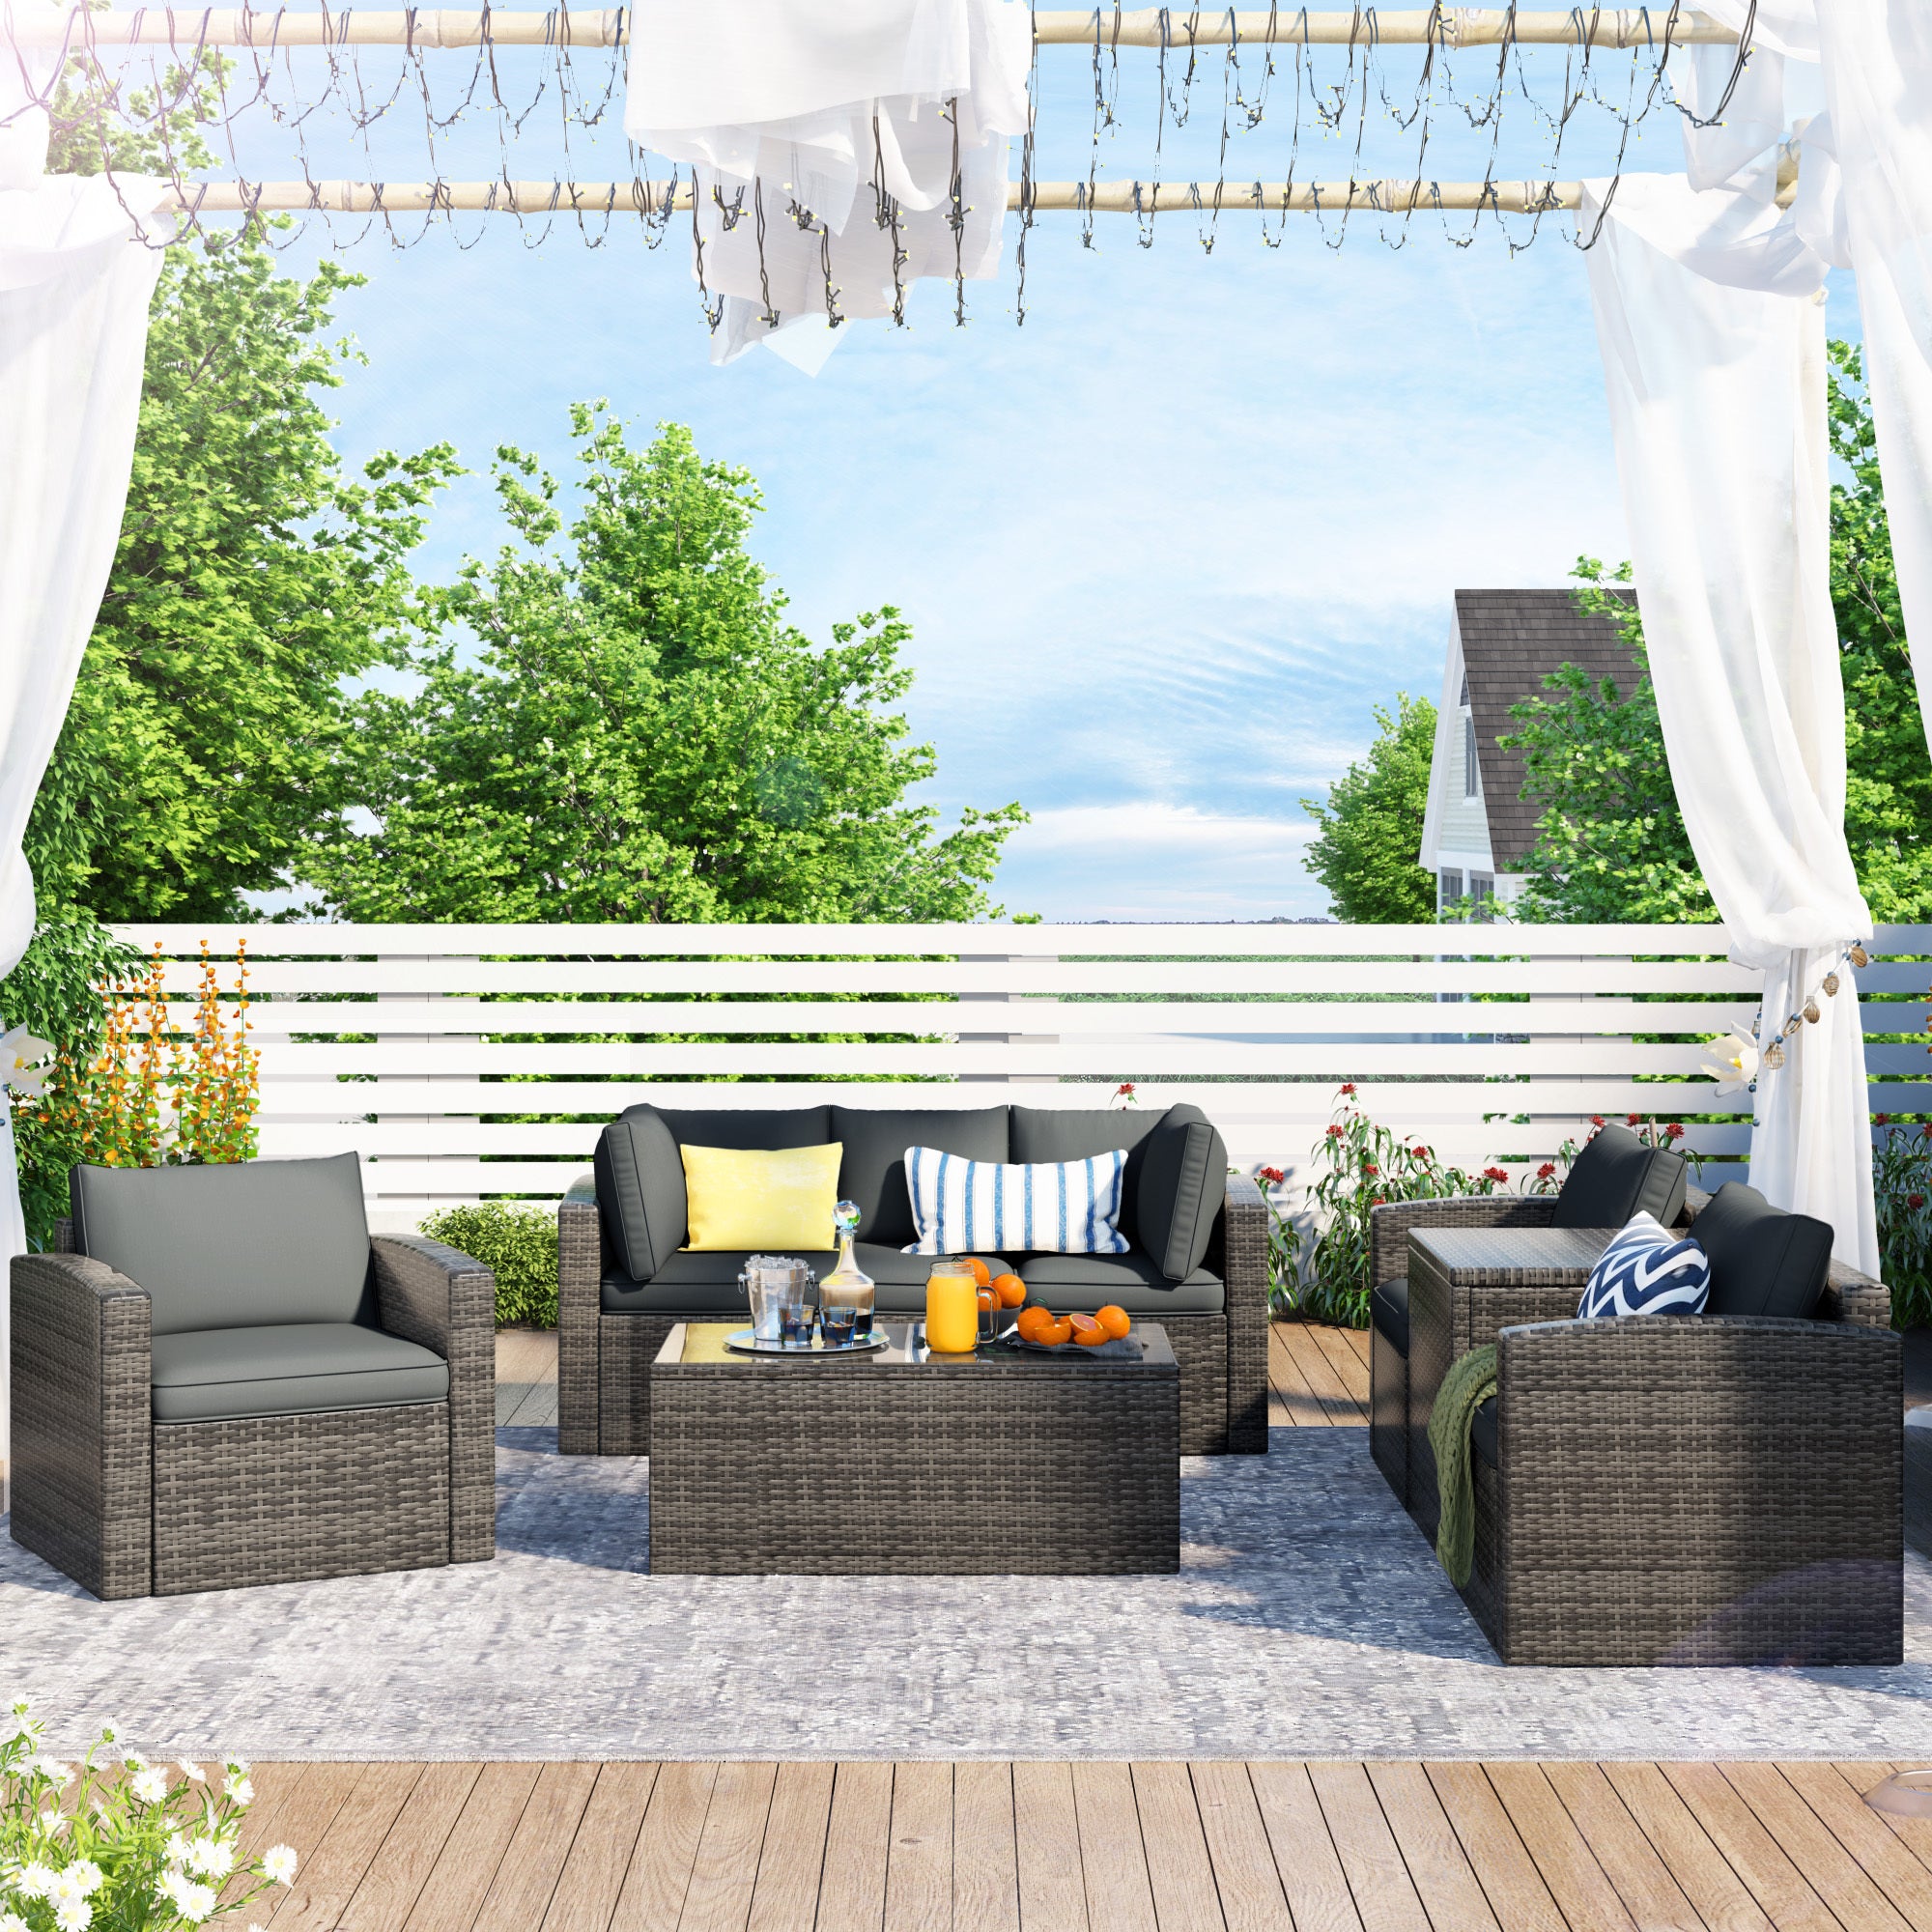 7-Piece Outdoor Sectional Sofa with Cushions & Storage Box